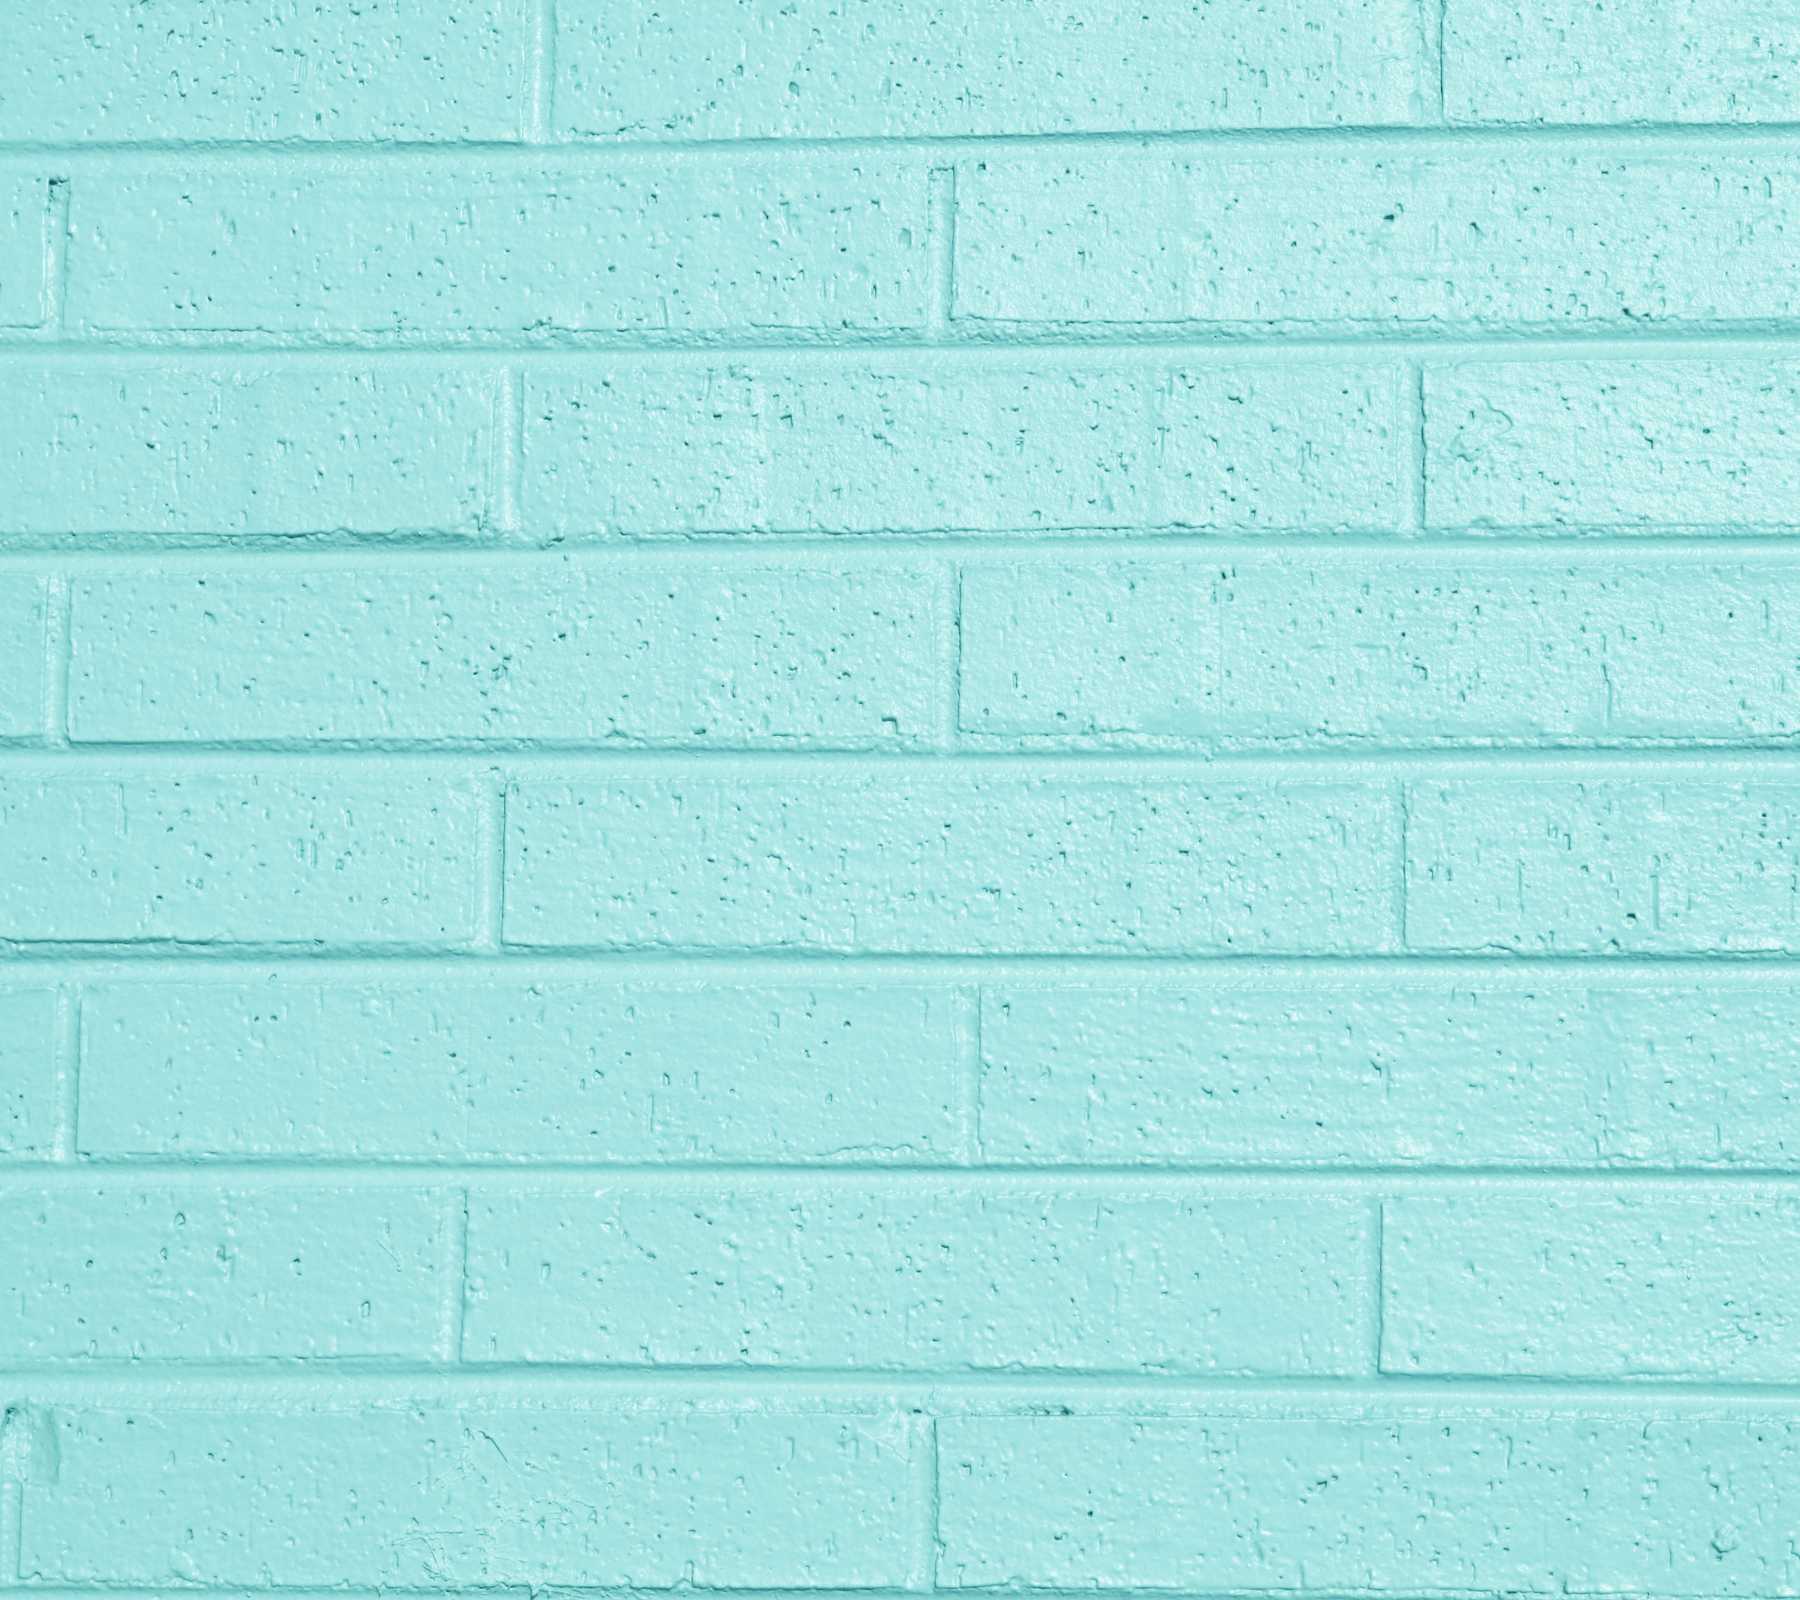 Aqua Colored Painted Brick Wall Background Image Wallpaper Or Texture